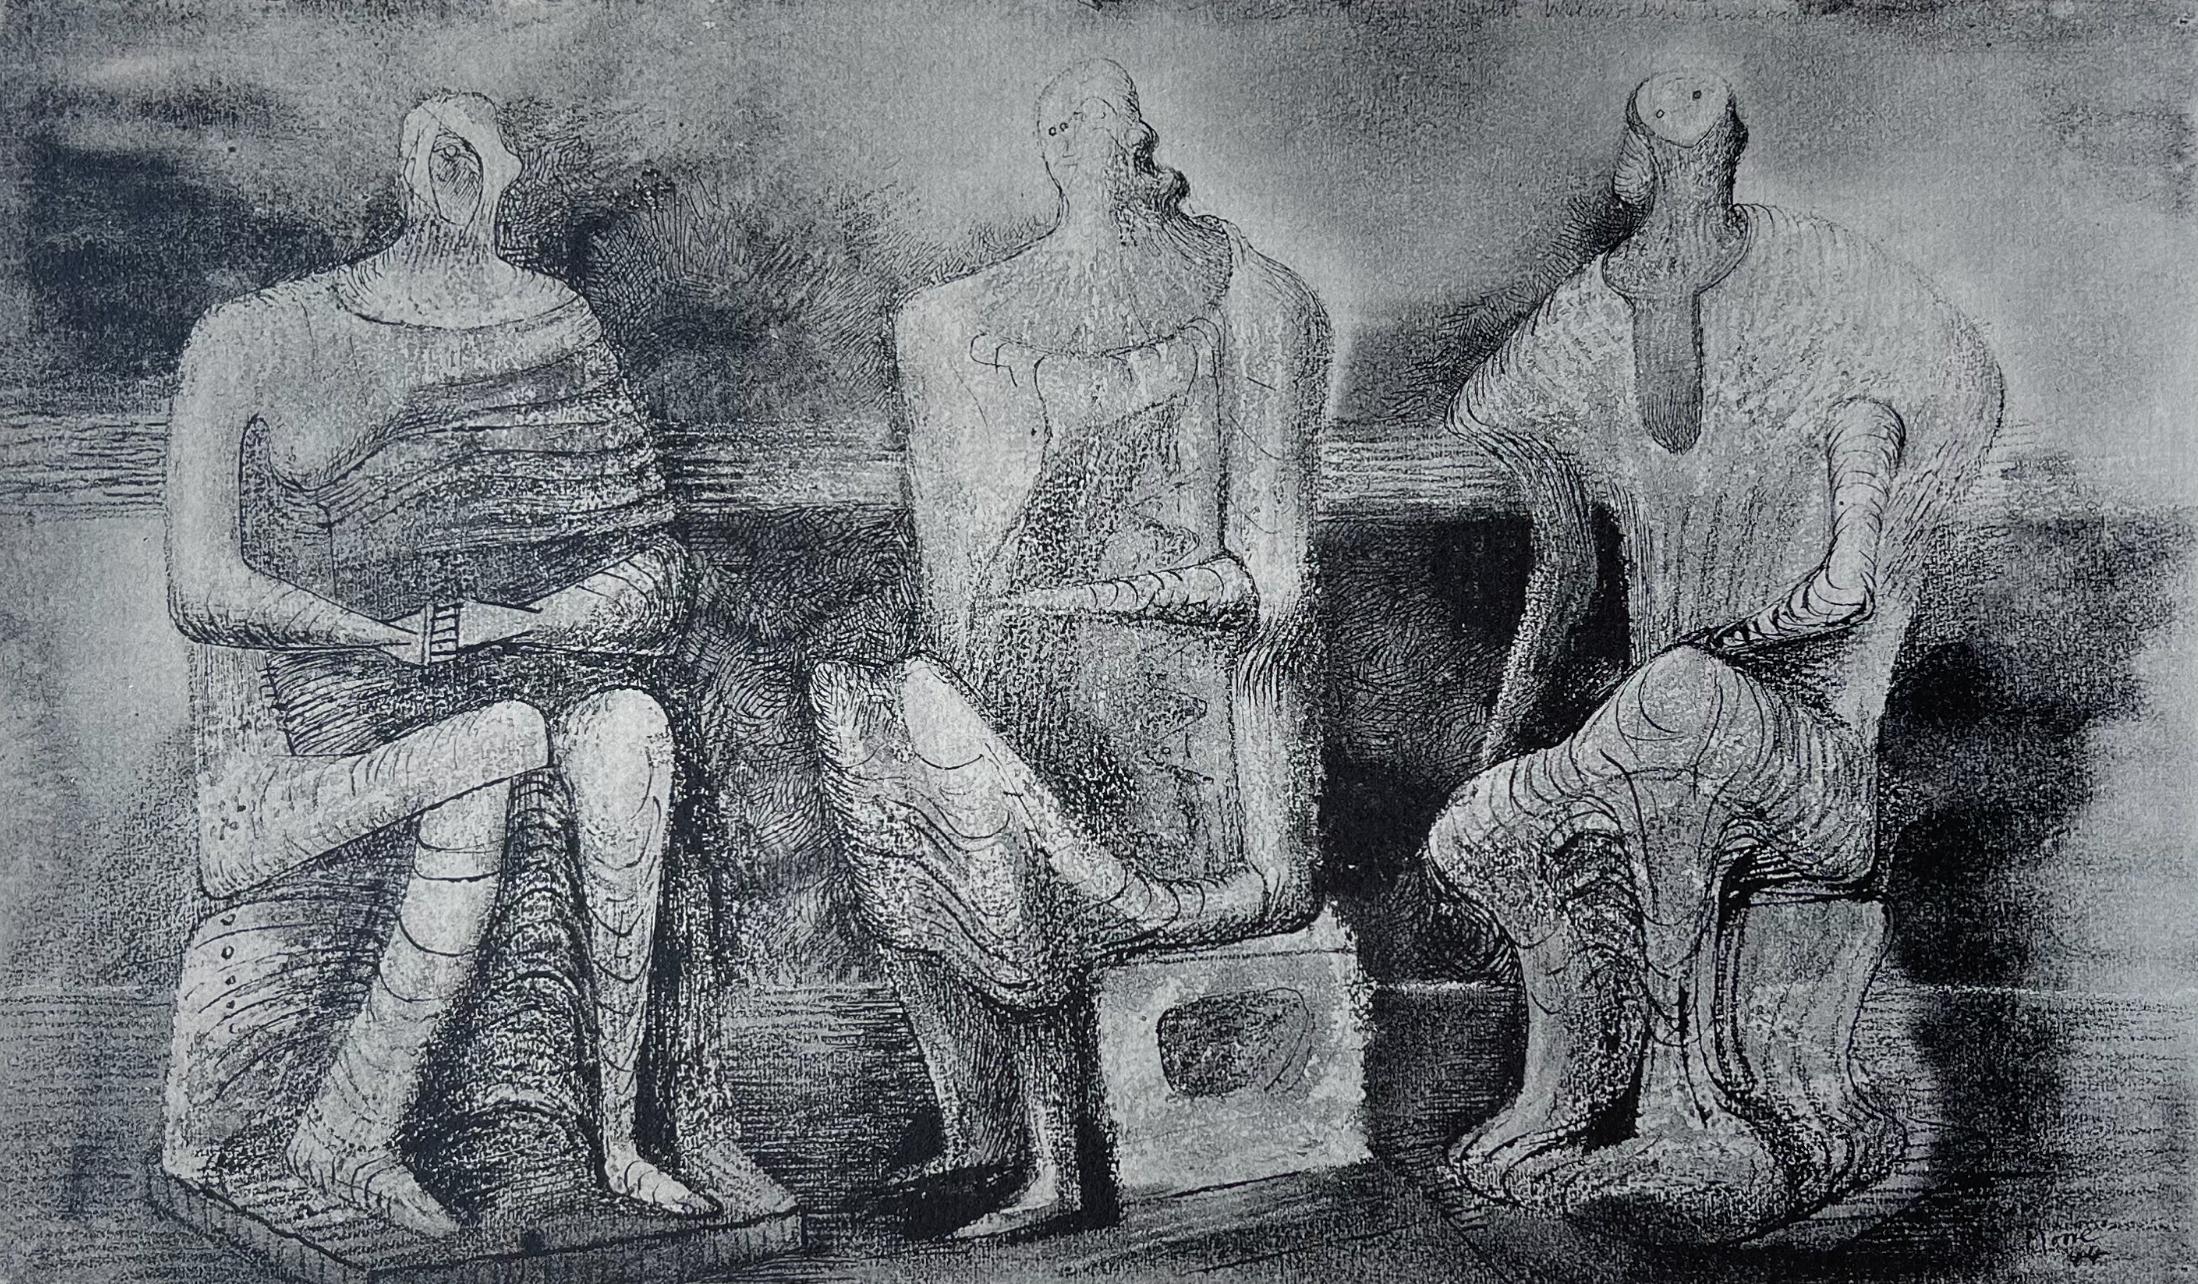 Lithograph on wove paper. Unsigned and unnumbered, as issued. Good condition; never framed or matted. Notes: From the folio, The Drawings of Henry Moore, 1946. Published by Curt Valentin, New York; printed by Duenewald Printing Corporation, New